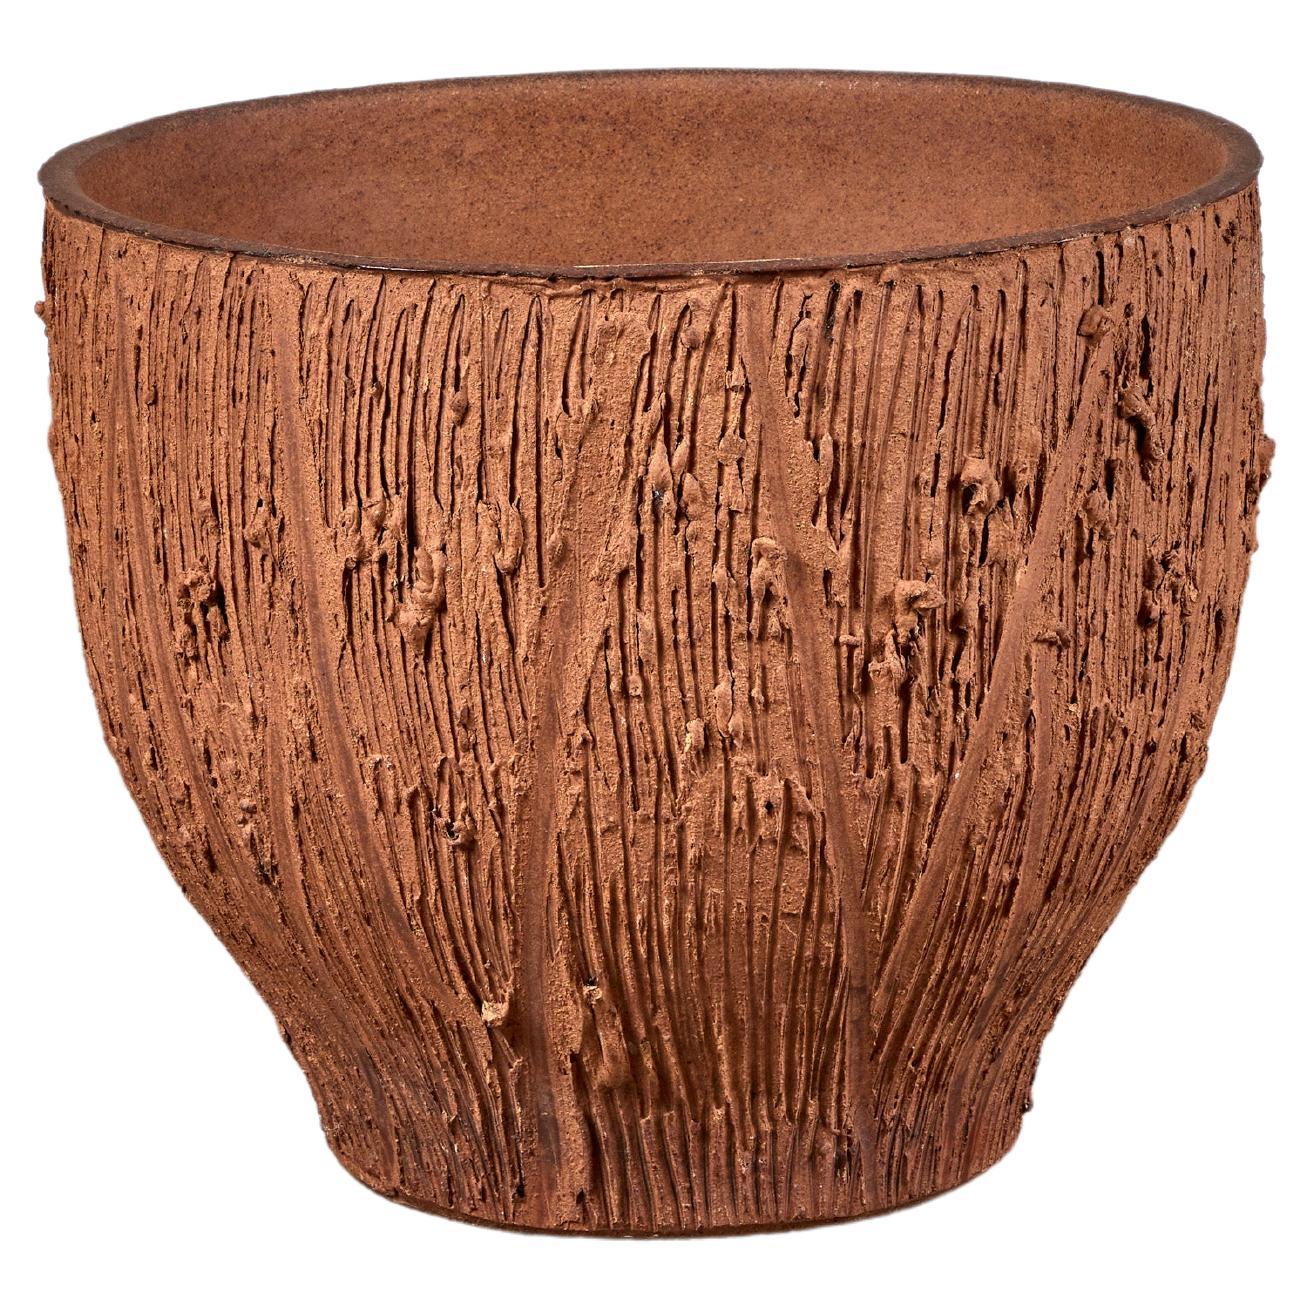 David Cressey "Scratch" Stoneware Pro/Artisan Planter for Architectural Pottery For Sale